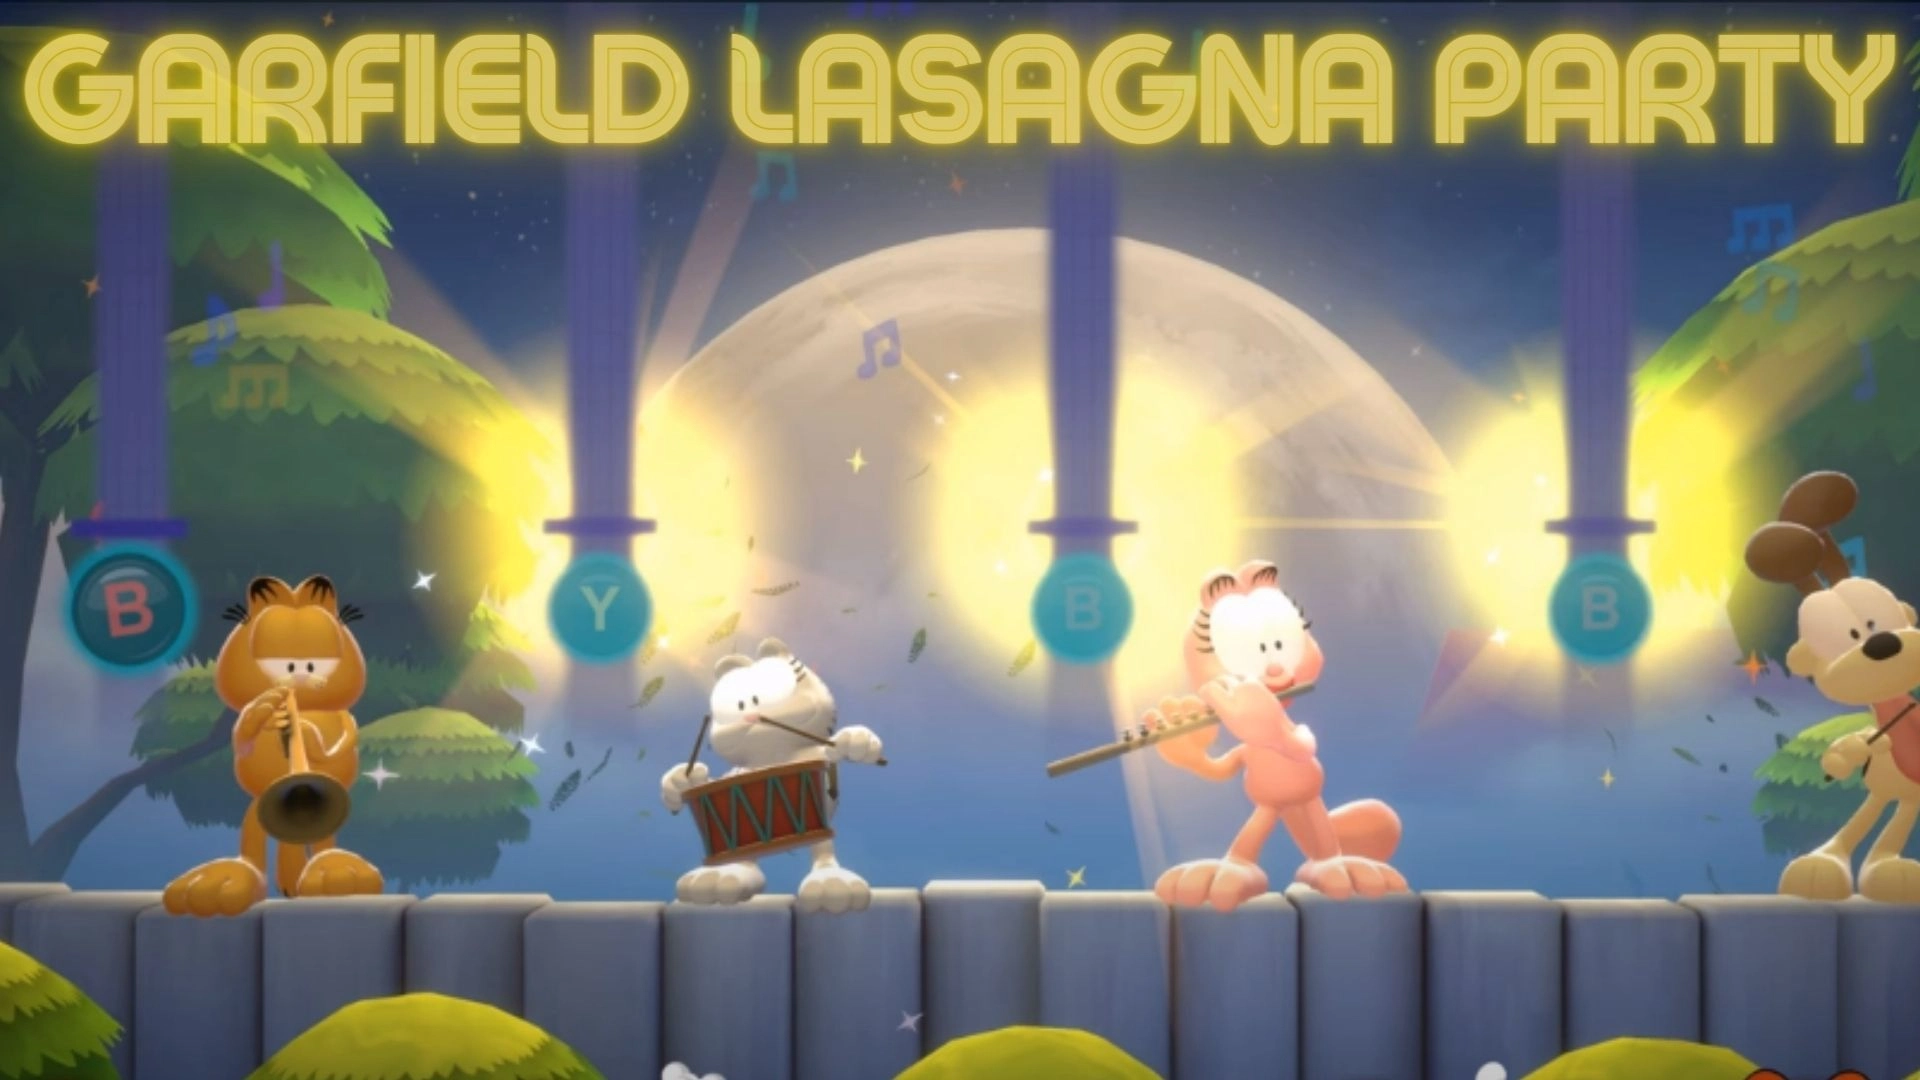 Garfield Lasagna Party Parents Guide and Age Rating (2022)